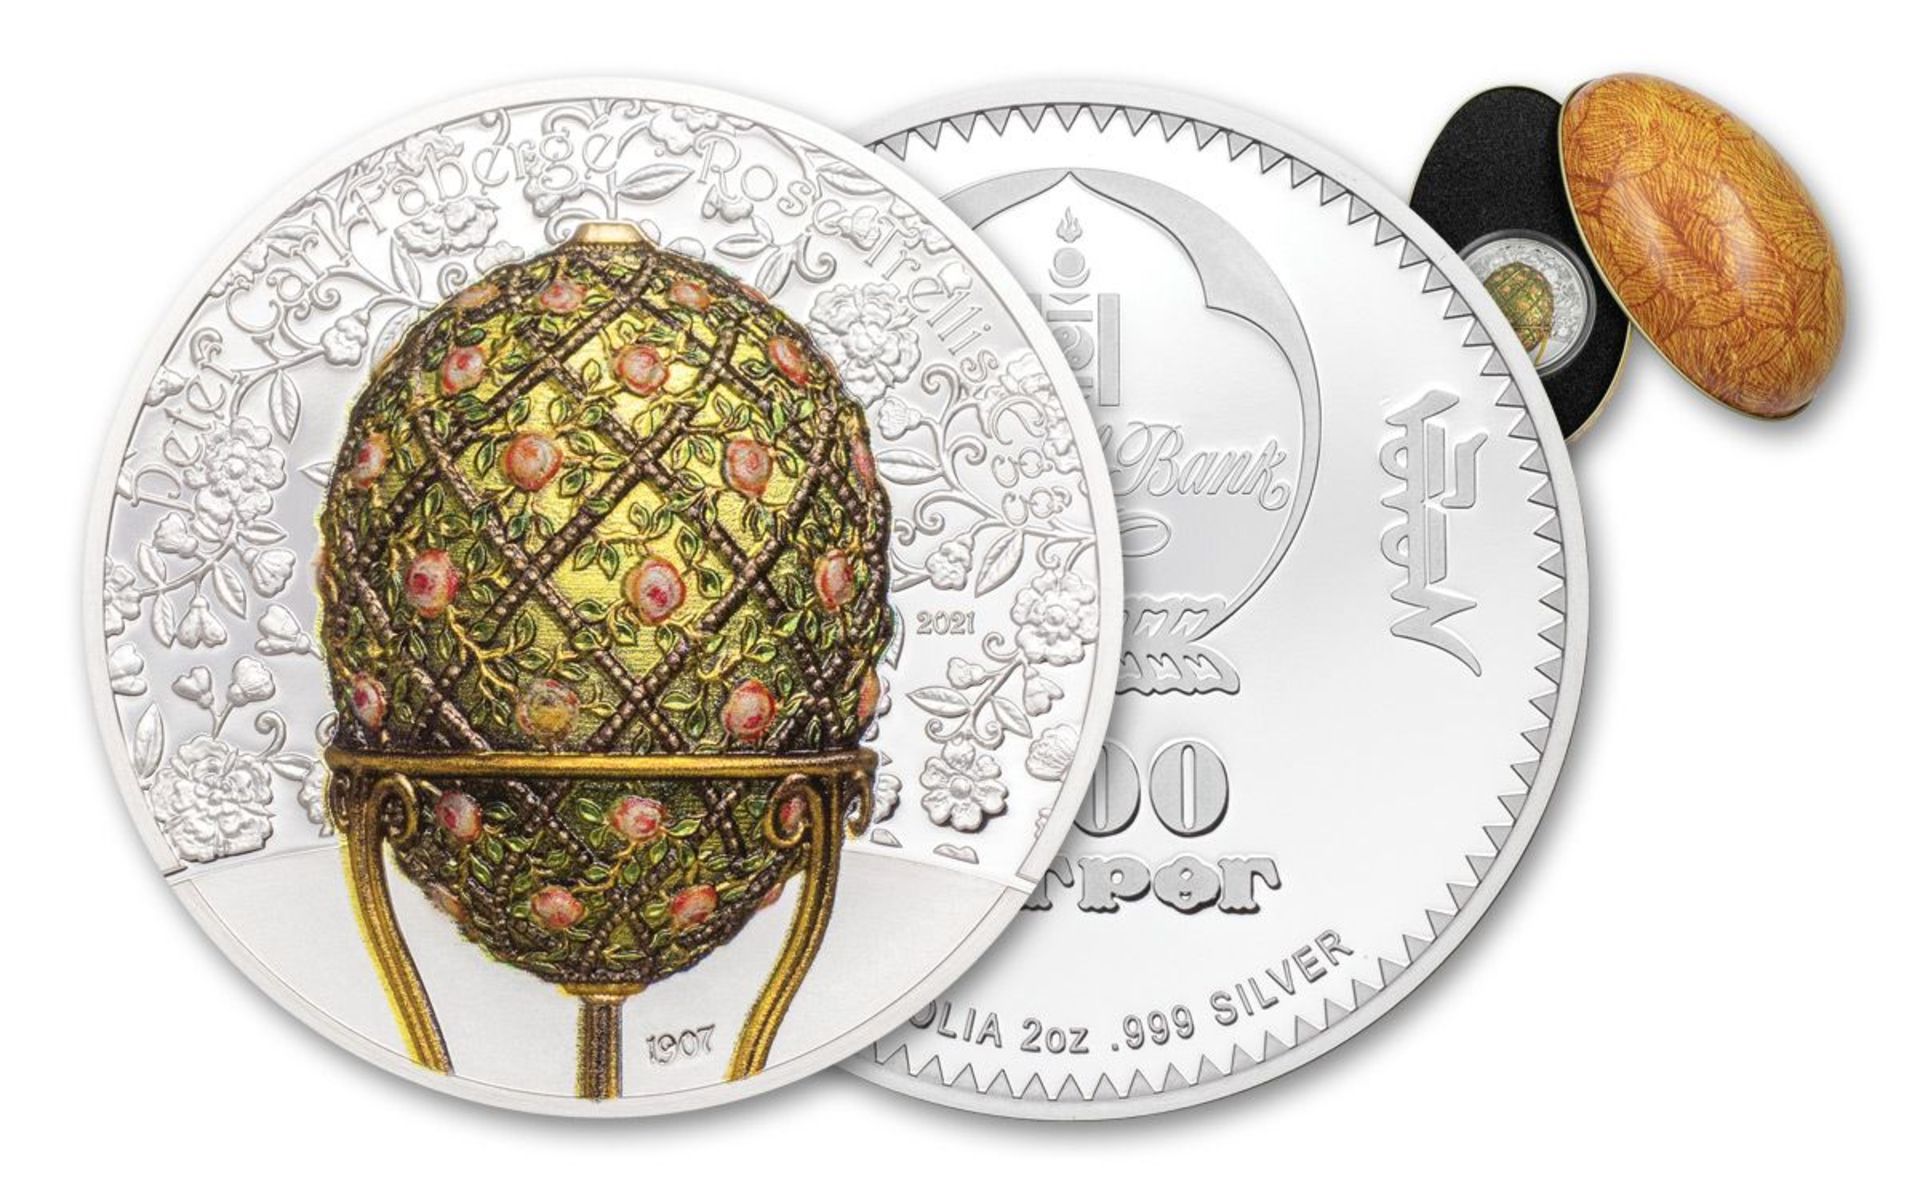 2021 Mongolia 2-oz Silver Faberge Rose Trellis Egg Colorized Ultra High Relief Gilt Proof - Image 2 of 4